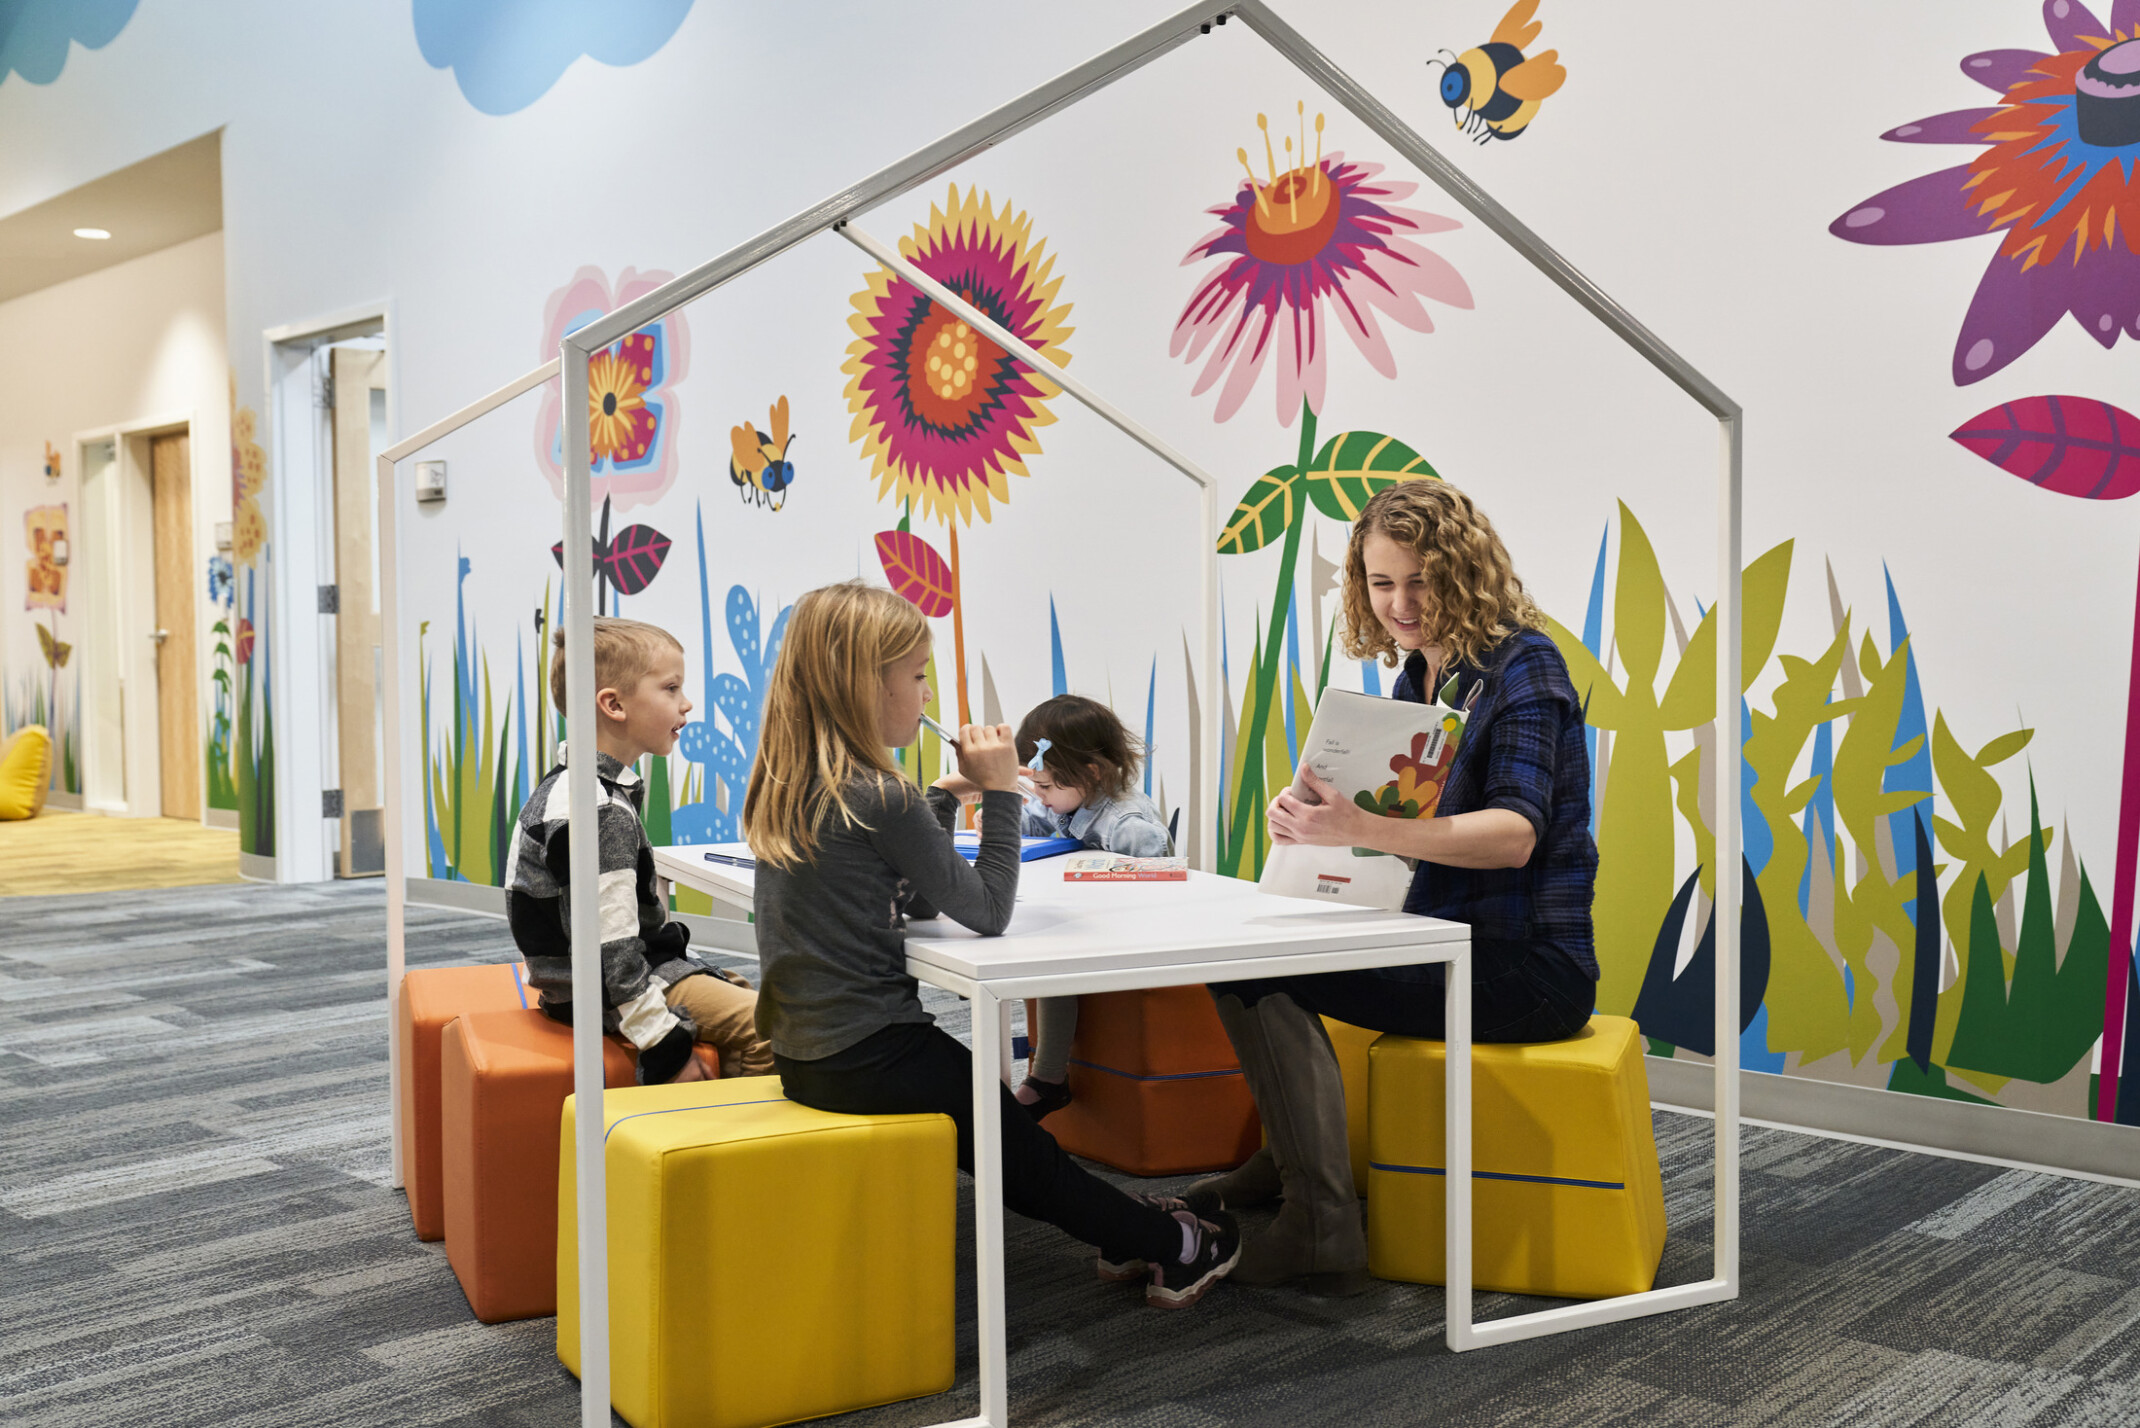 Educator and students reading on flexible comfortable yellow stools at white table with house shaped frame, bright graphic mural